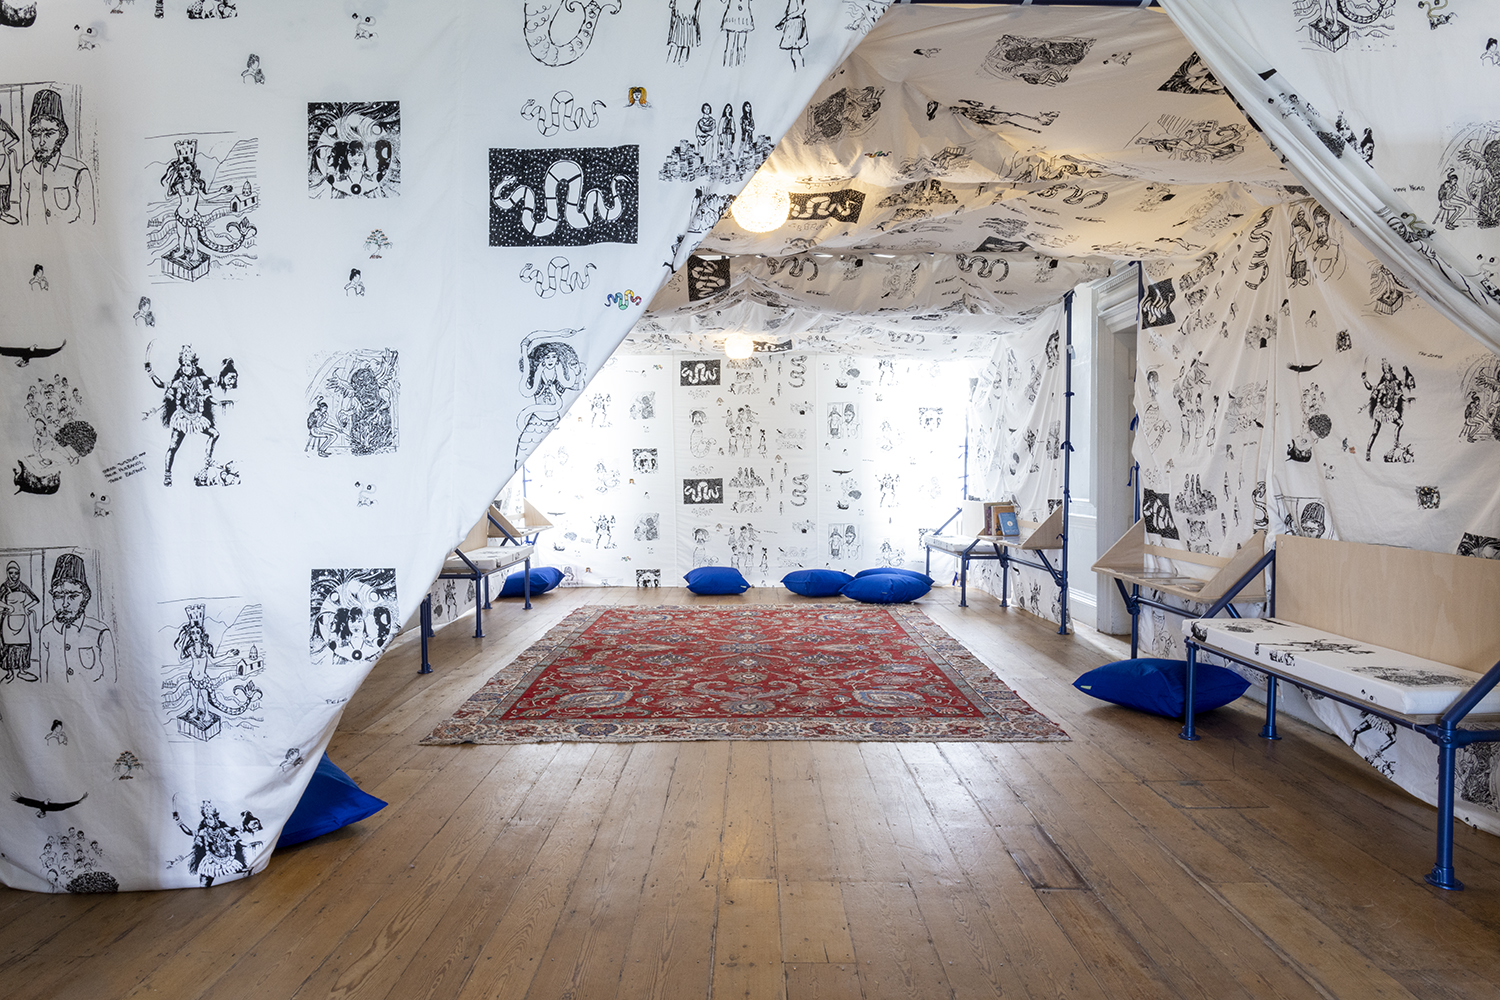 Image of a tented room. The fabric is illustrated with pictures in black and white.